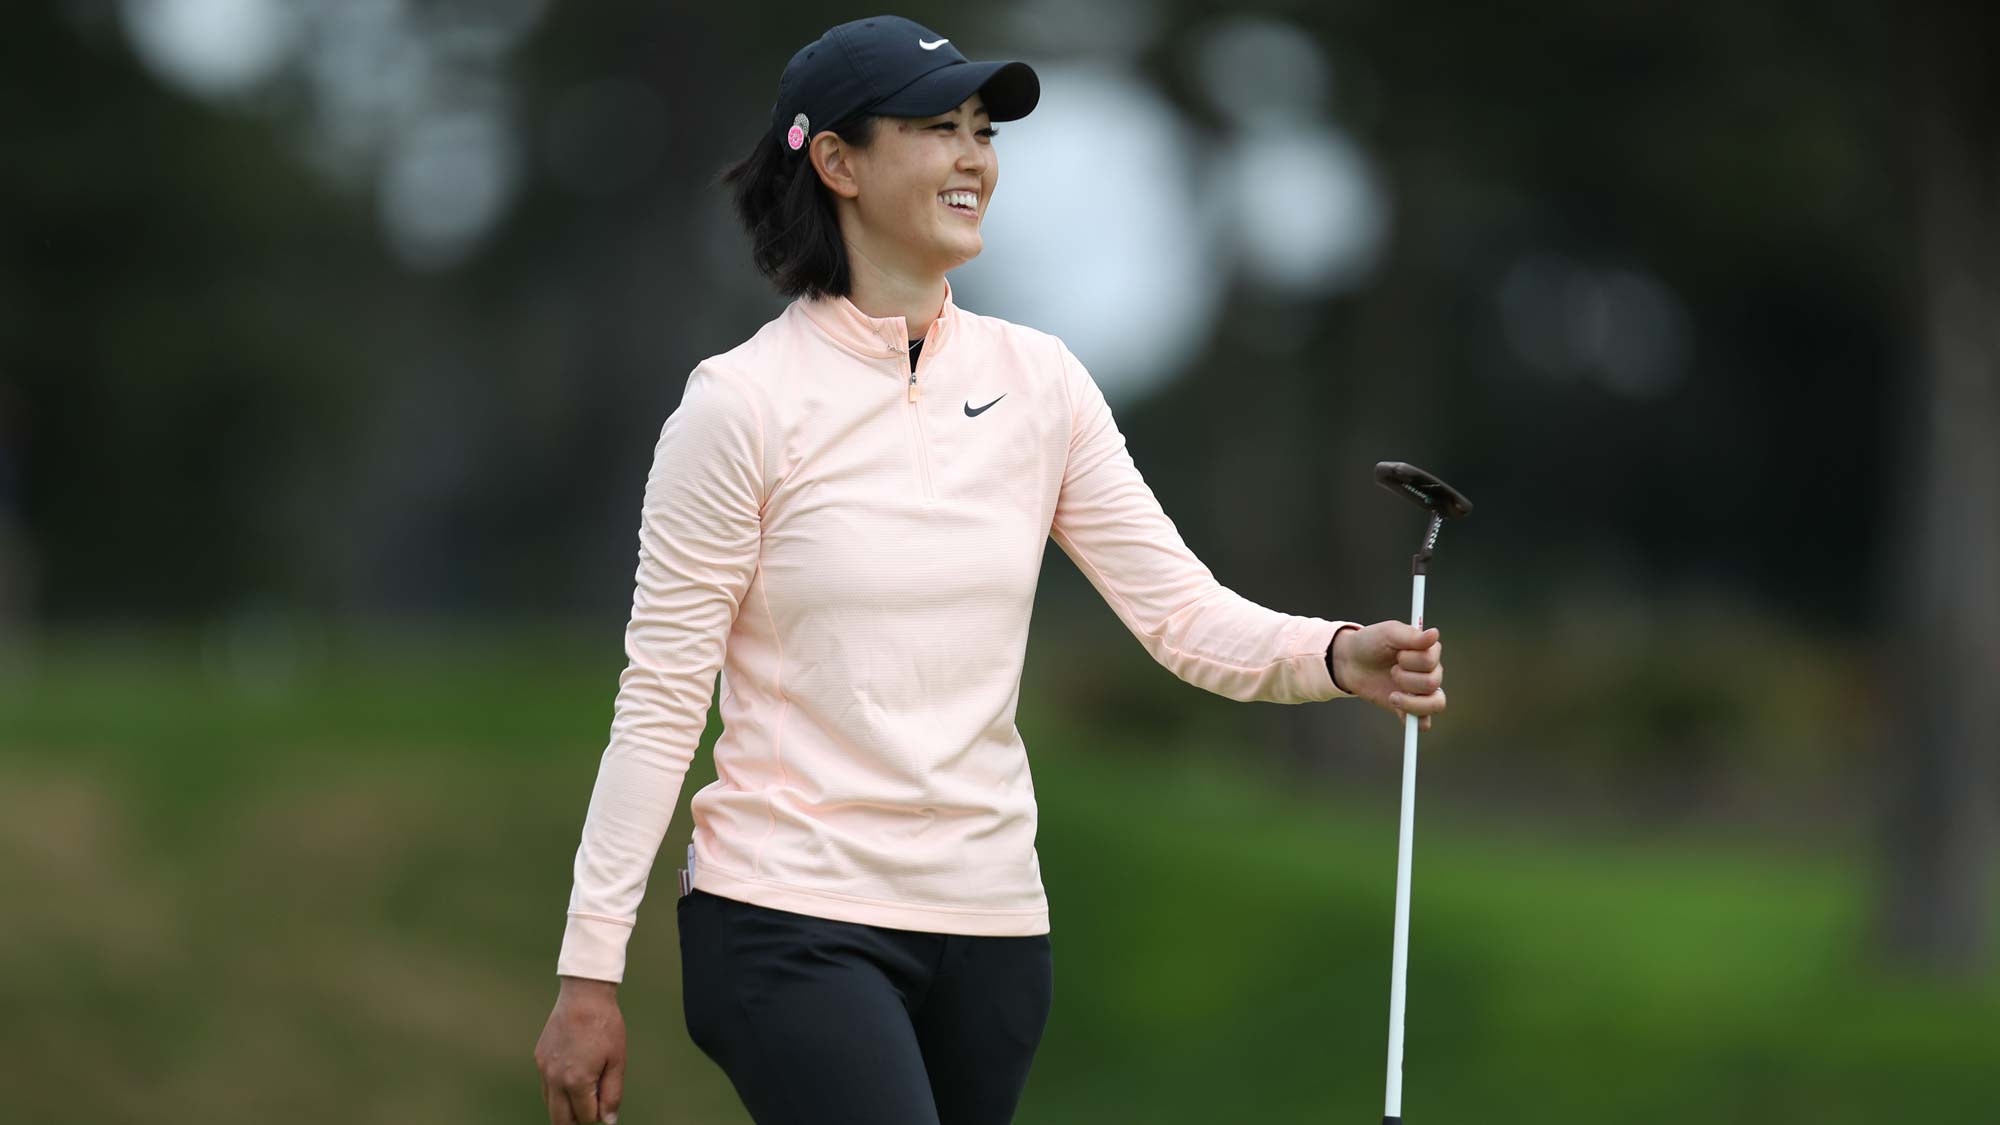 Michelle Wie West Announces She Is Stepping Away From The Game LPGA Ladies Professional Golf Association image pic